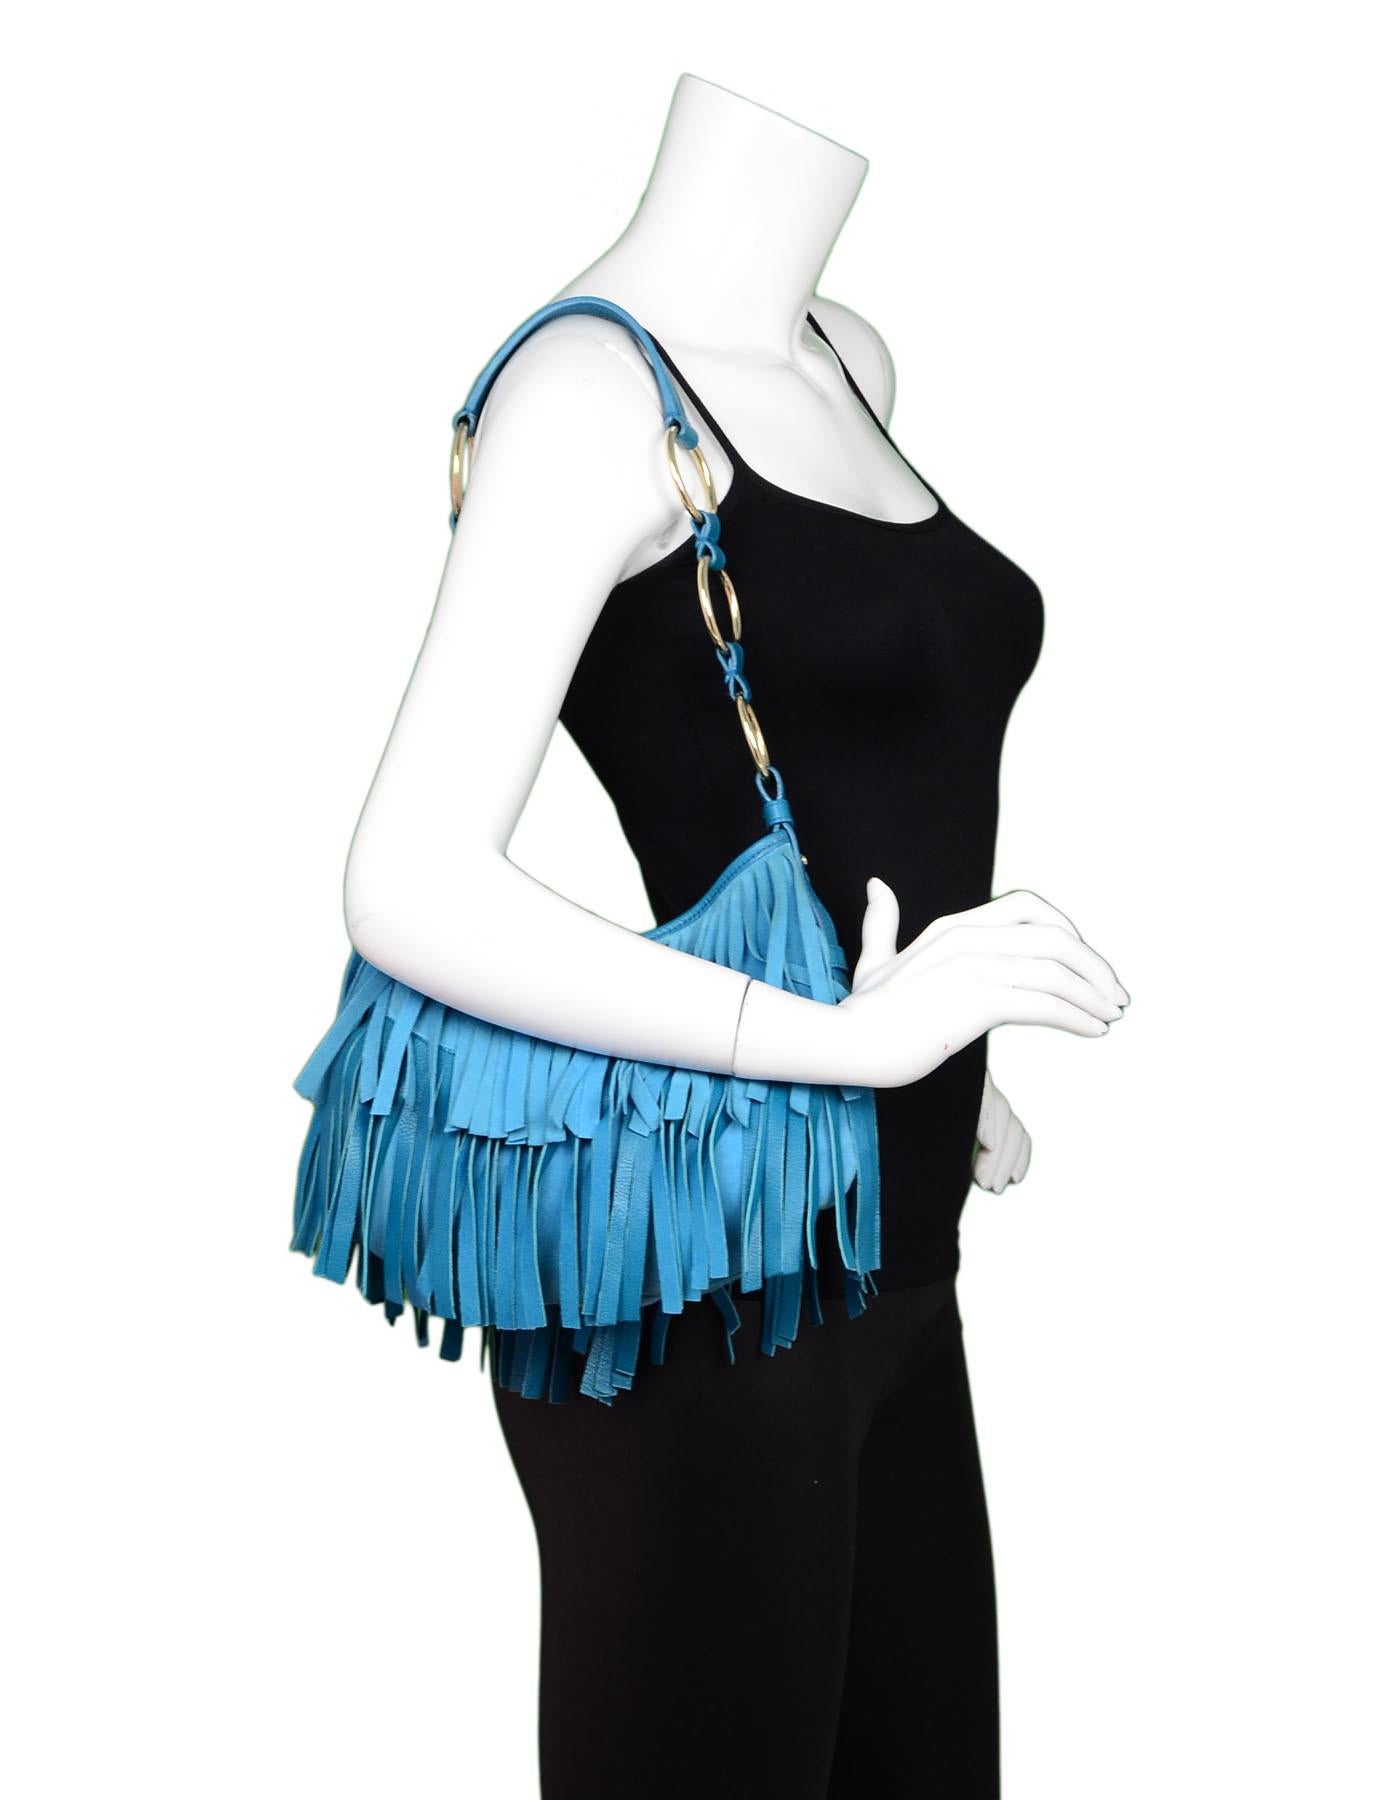 Yves Saint Laurent Aqua Suede & Leather Fringe Nadja Bag

Made In: Italy
Color: Aqua blue
Hardware: Goldtone
Materials: Leather, suede, metal
Lining: Black textile
Closure/Opening: Open top with center snap
Exterior Pockets: None
Interior Pockets: